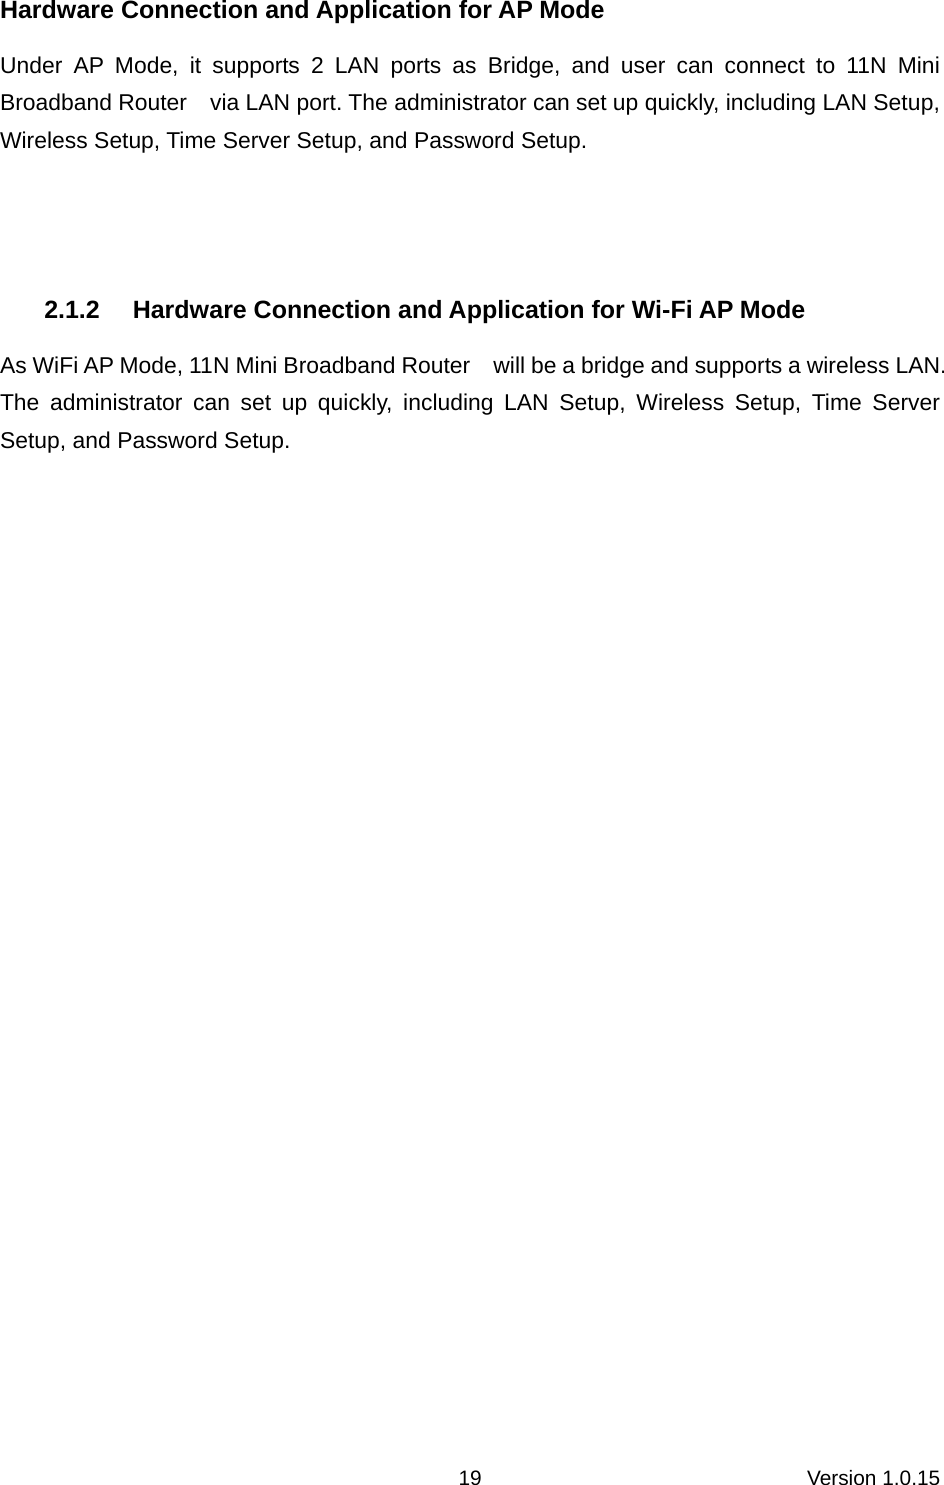 Version 1.0.15 19Hardware Connection and Application for AP Mode   Under AP Mode, it supports 2 LAN ports as Bridge, and user can connect to 11N Mini Broadband Router    via LAN port. The administrator can set up quickly, including LAN Setup, Wireless Setup, Time Server Setup, and Password Setup.   2.1.2 Hardware Connection and Application for Wi-Fi AP Mode As WiFi AP Mode, 11N Mini Broadband Router    will be a bridge and supports a wireless LAN. The administrator can set up quickly, including LAN Setup, Wireless Setup, Time Server Setup, and Password Setup.  